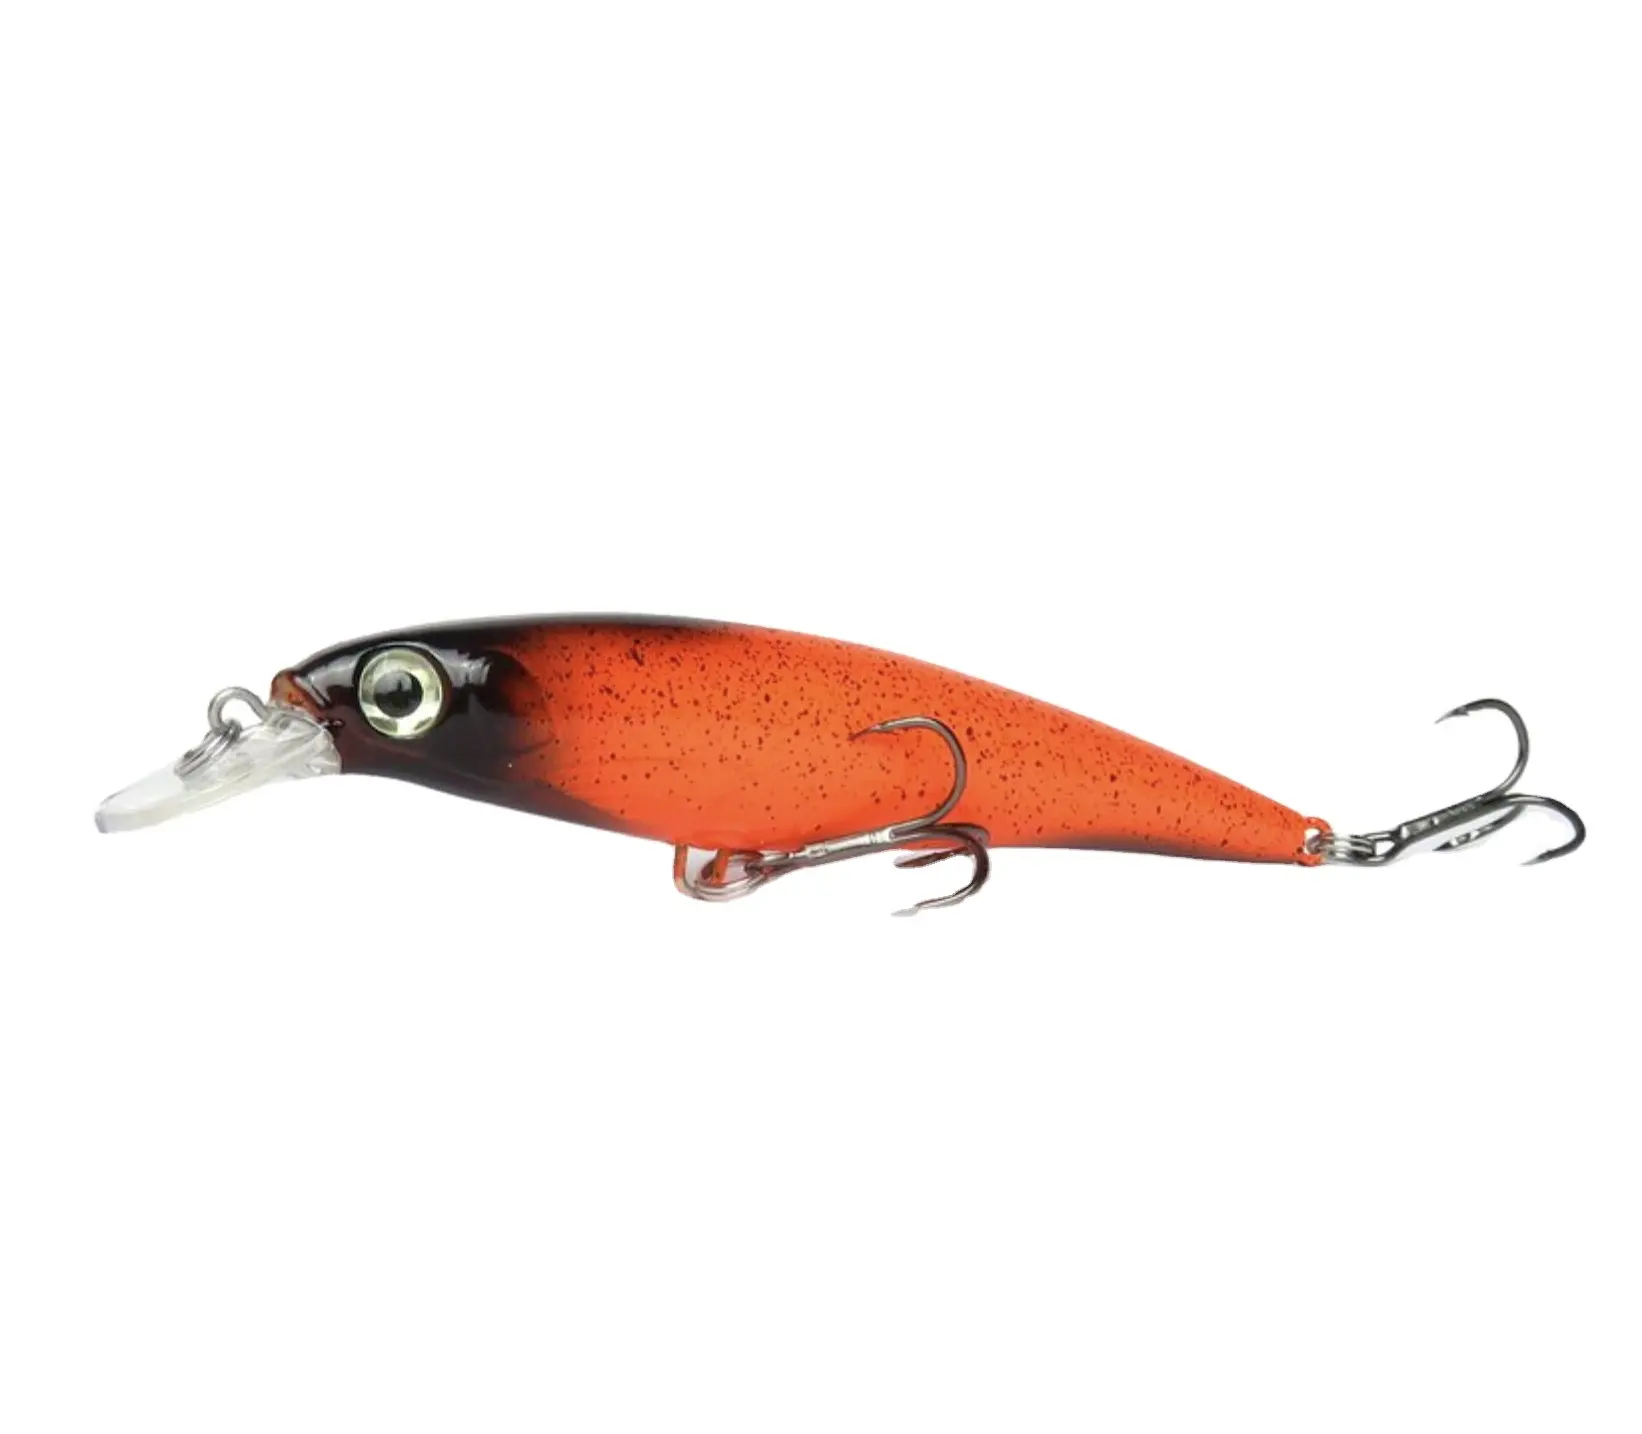 minnow lures hard plastic ABS lures Hot sale small crankbait fishing jigs lure molds oem factory